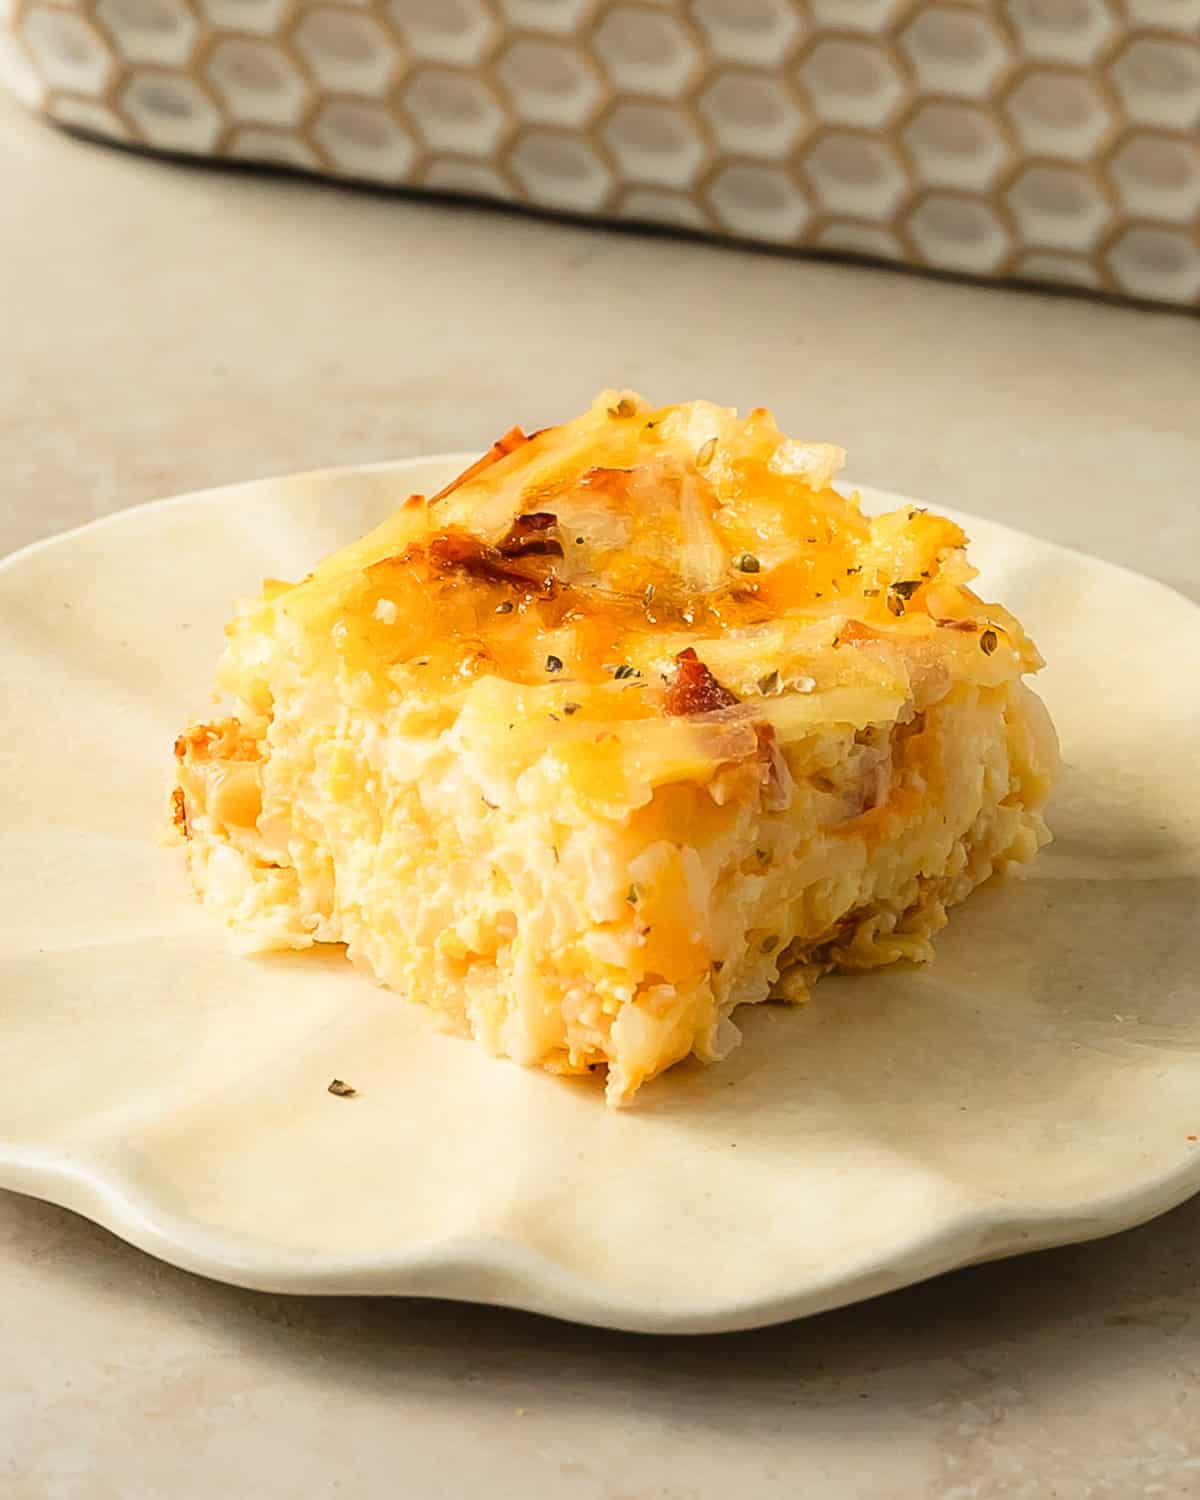 Amish breakfast casserole is a rich and hearty breakfast dish made from eggs, three kinds of cheese, hash browns and bacon.  It’s quick, easy to prepare and feeds a crowd.  Make this comforting cheesy egg bake for a weekend treat or as special holiday breakfast or brunch. 